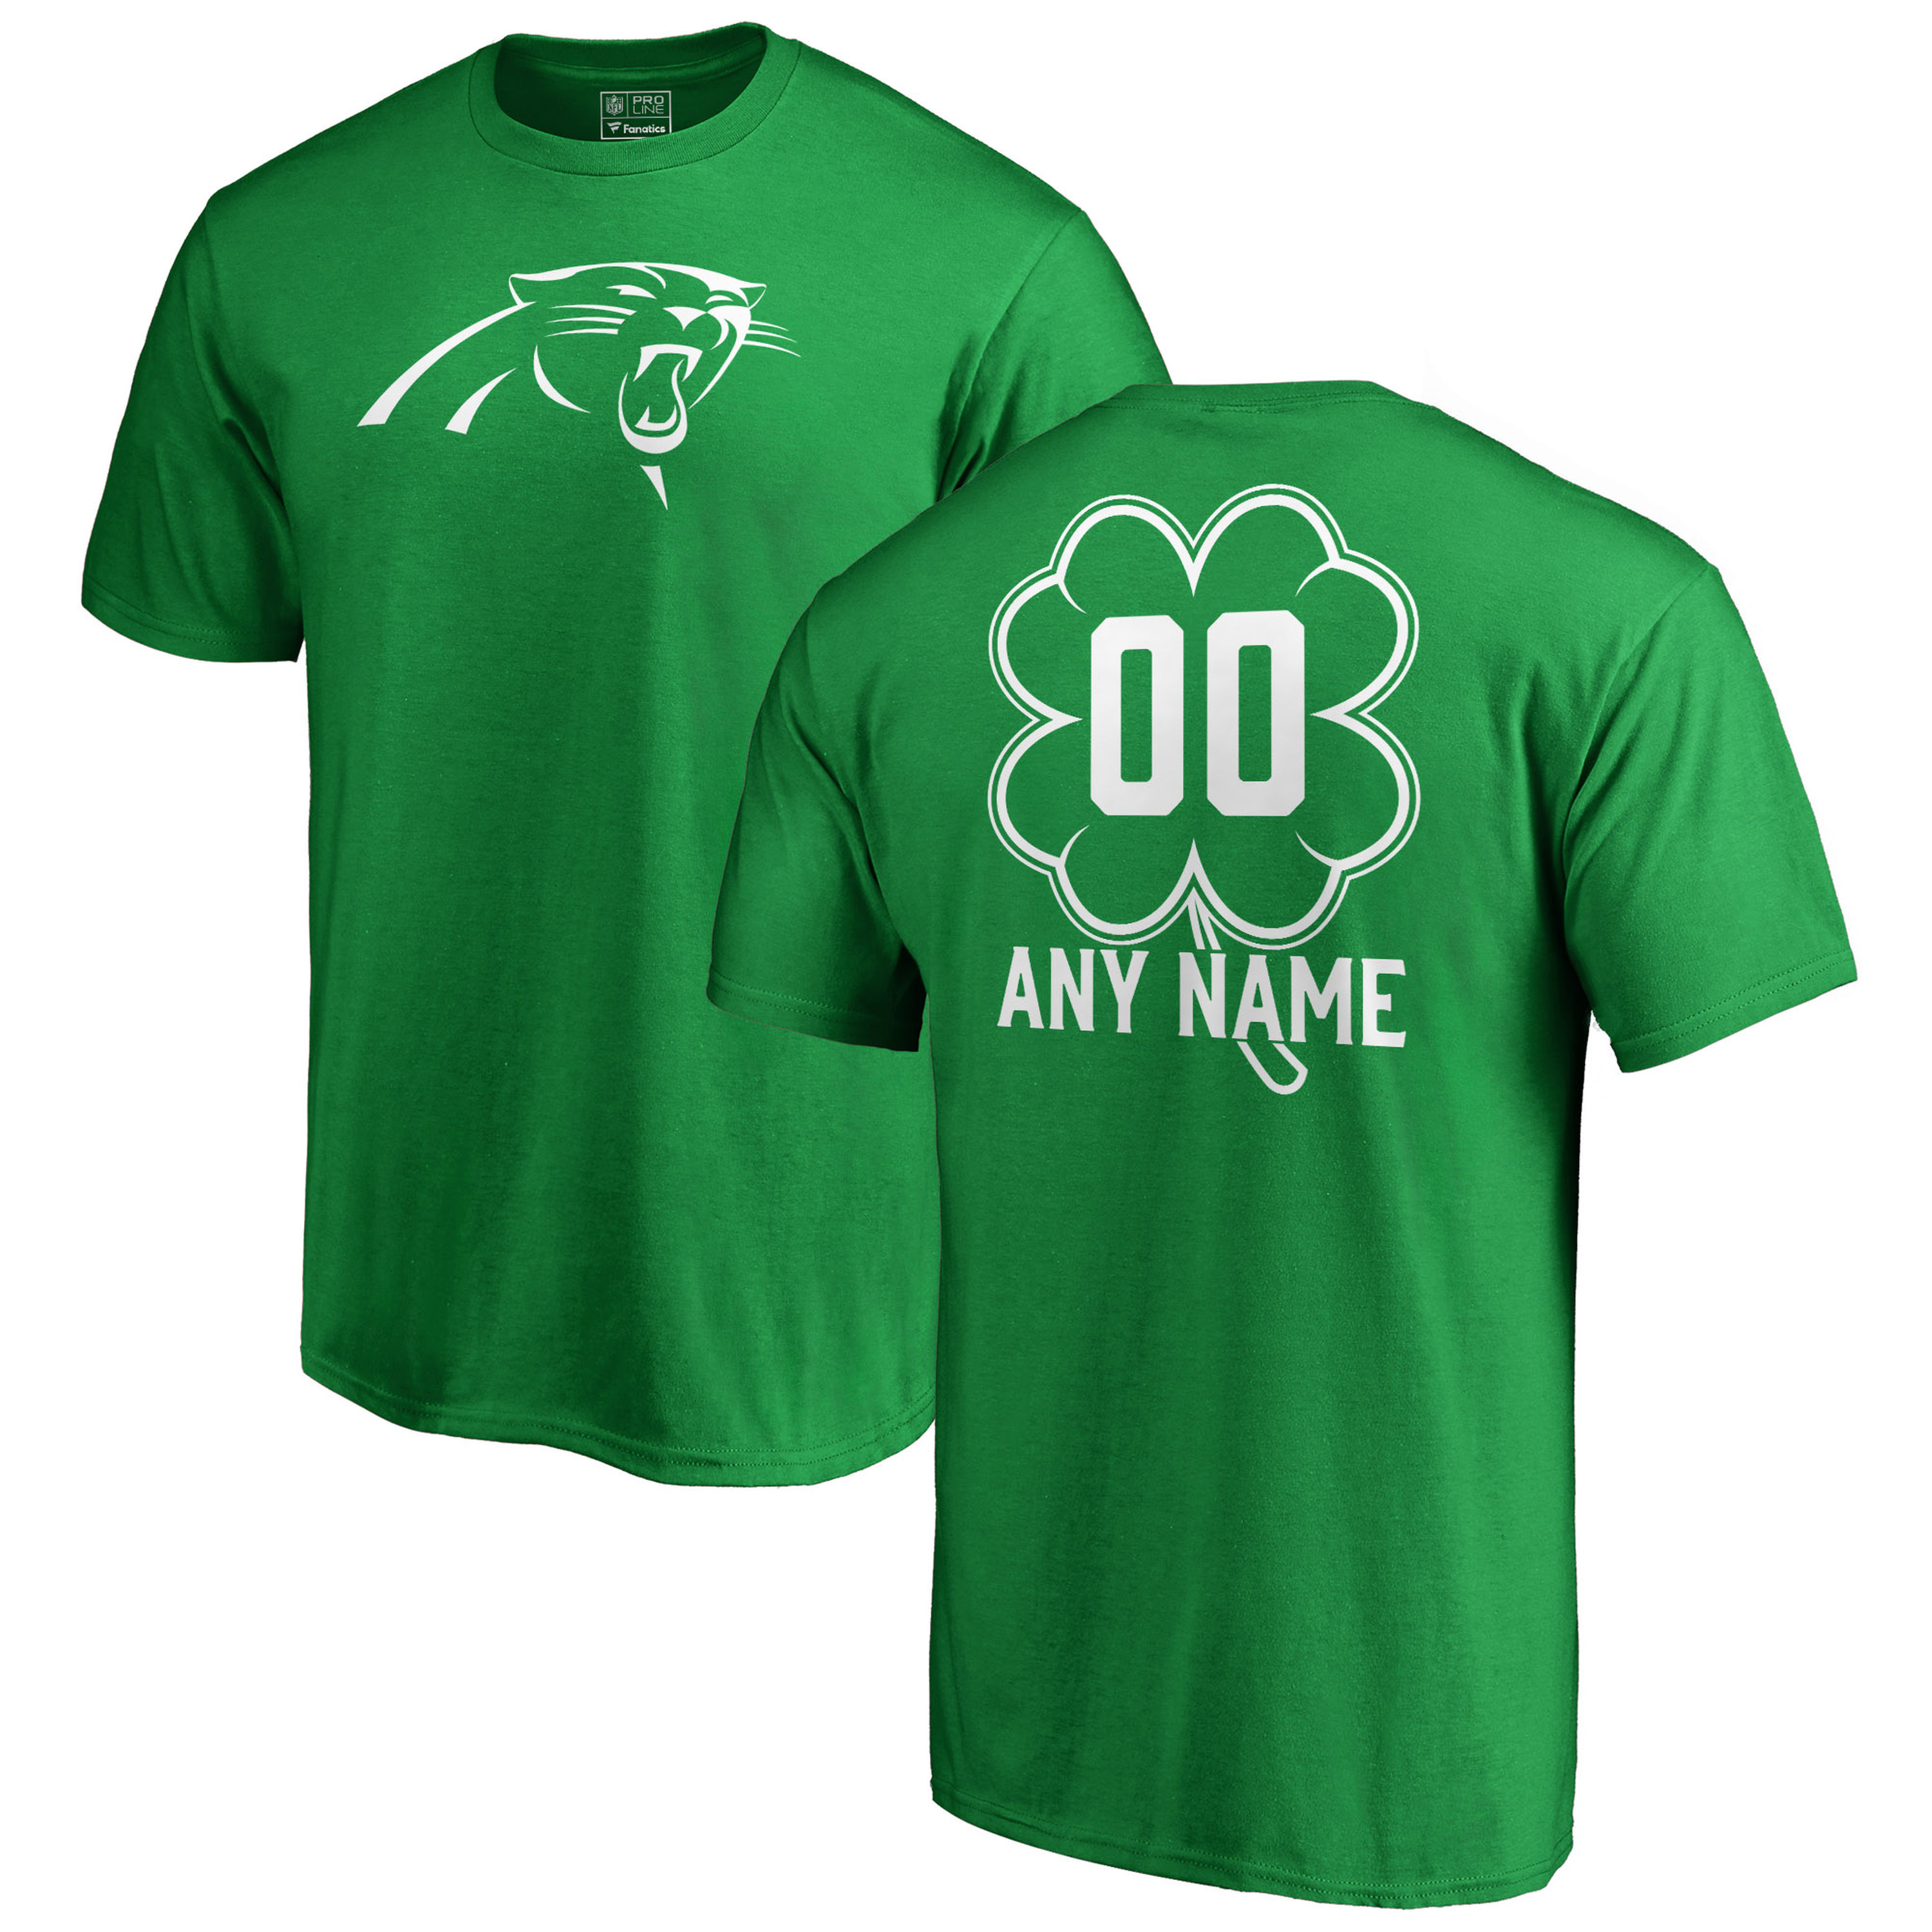 Men's Carolina Panthers NFL Pro Line by Fanatics Branded Kelly Green St. Patrick's Day Personalized Name & Number T-Shirt